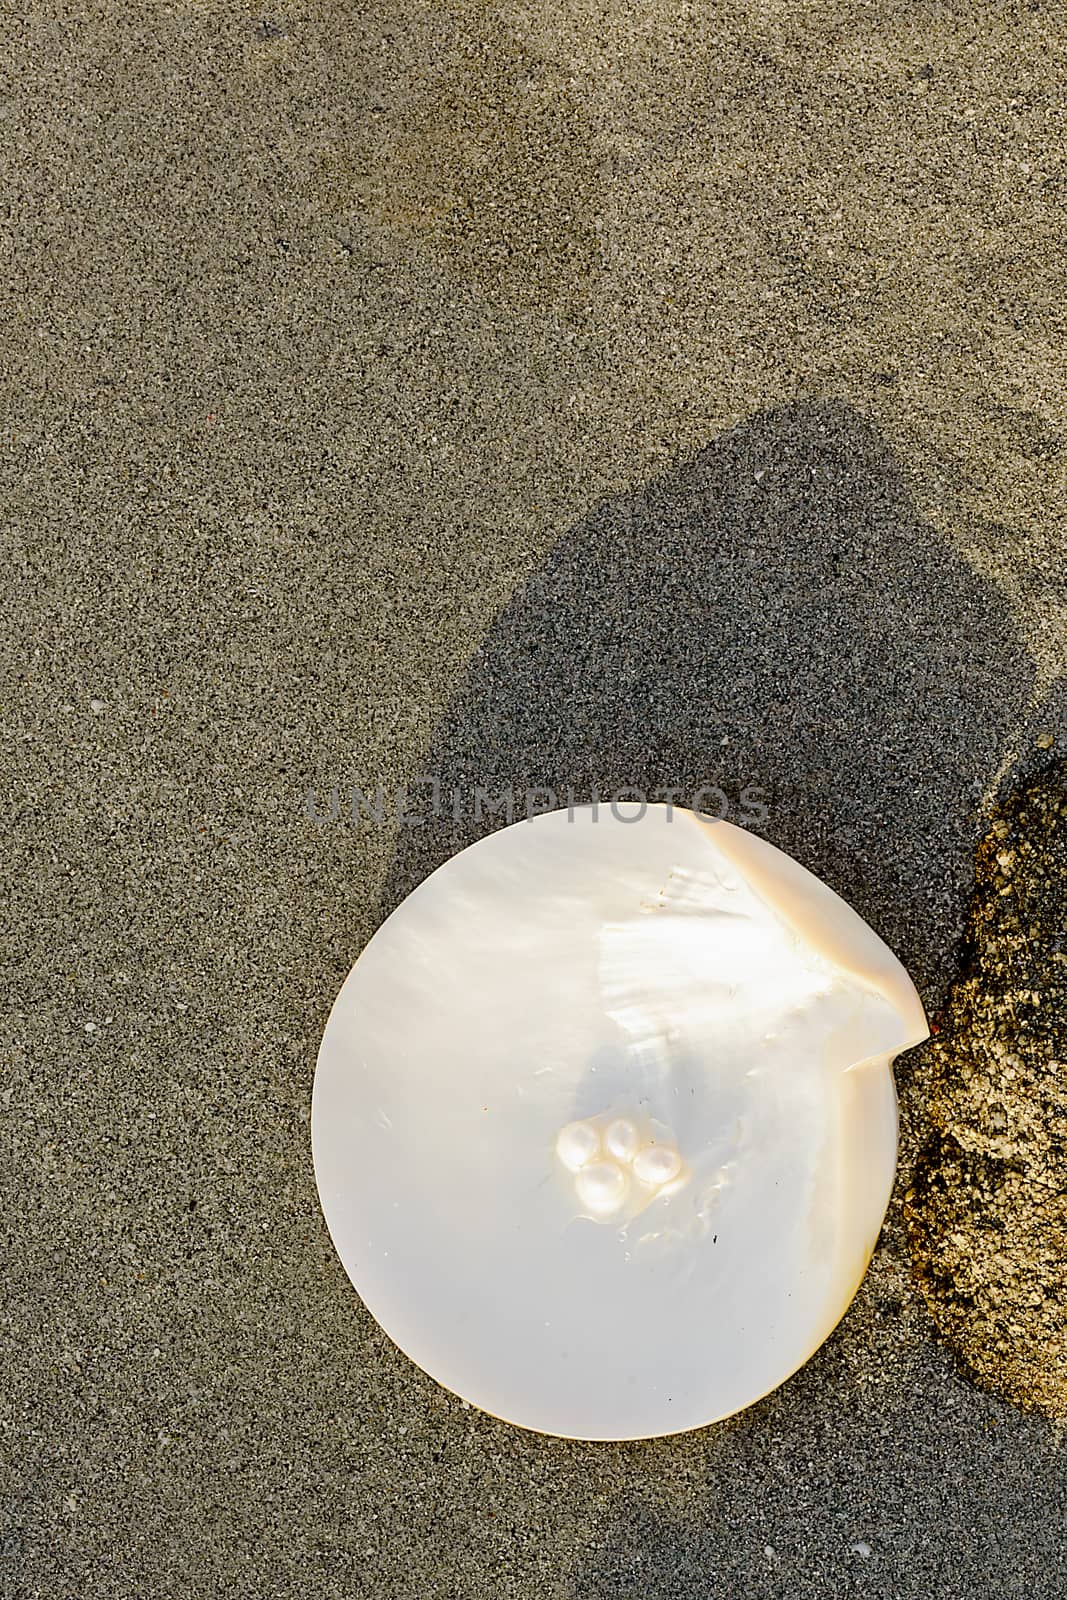 Sea shell with pearl on the sandy beach. Oysters and pearls of origin Japan.